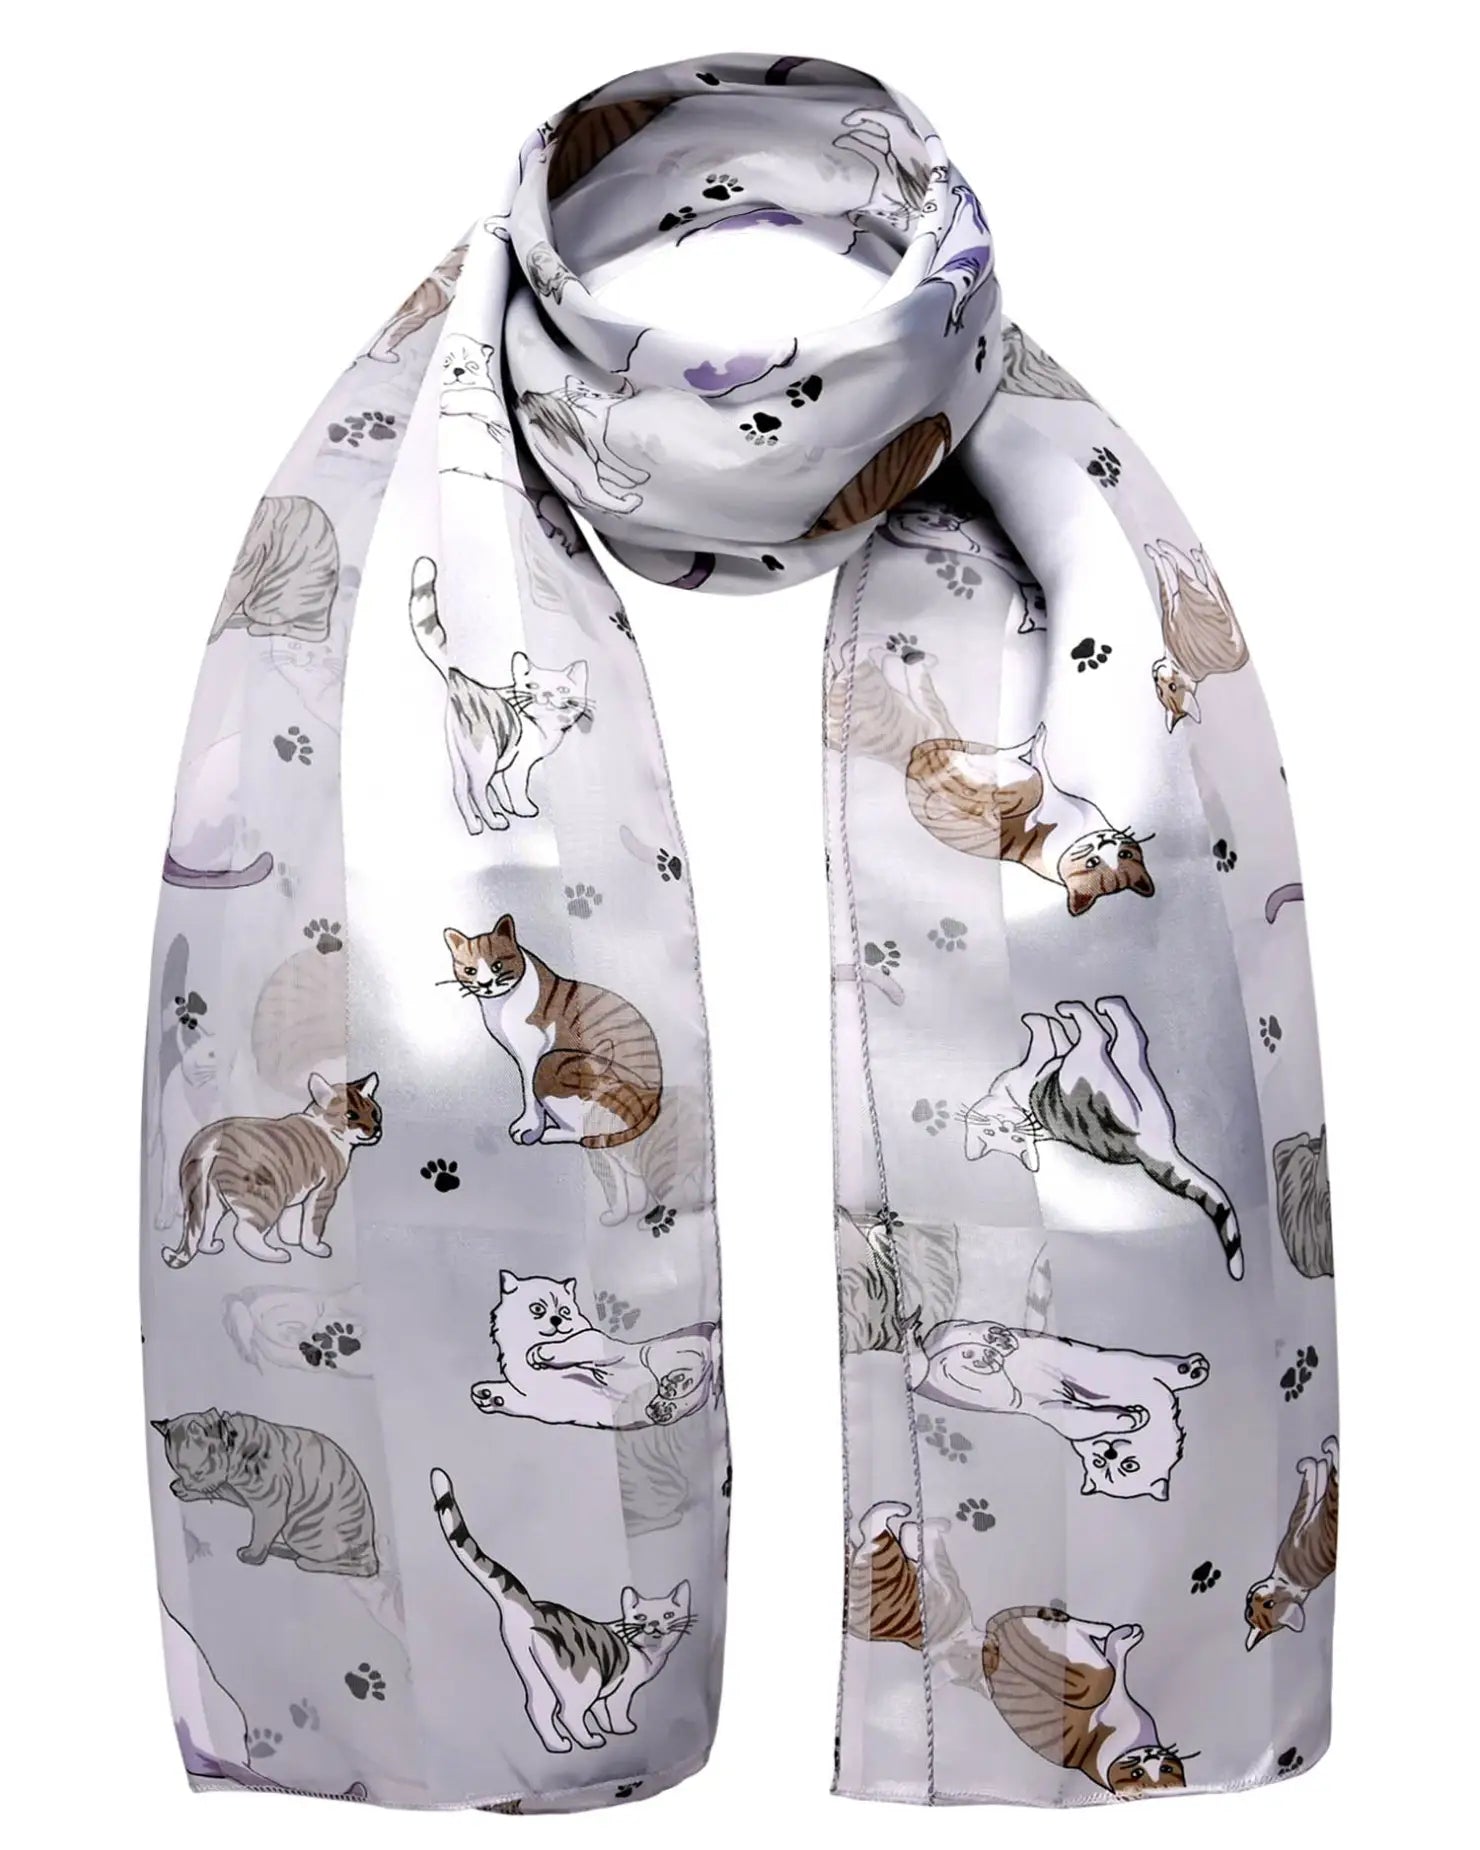 White scarf with cat print pattern displayed in Cat Print Novelty Scarf.